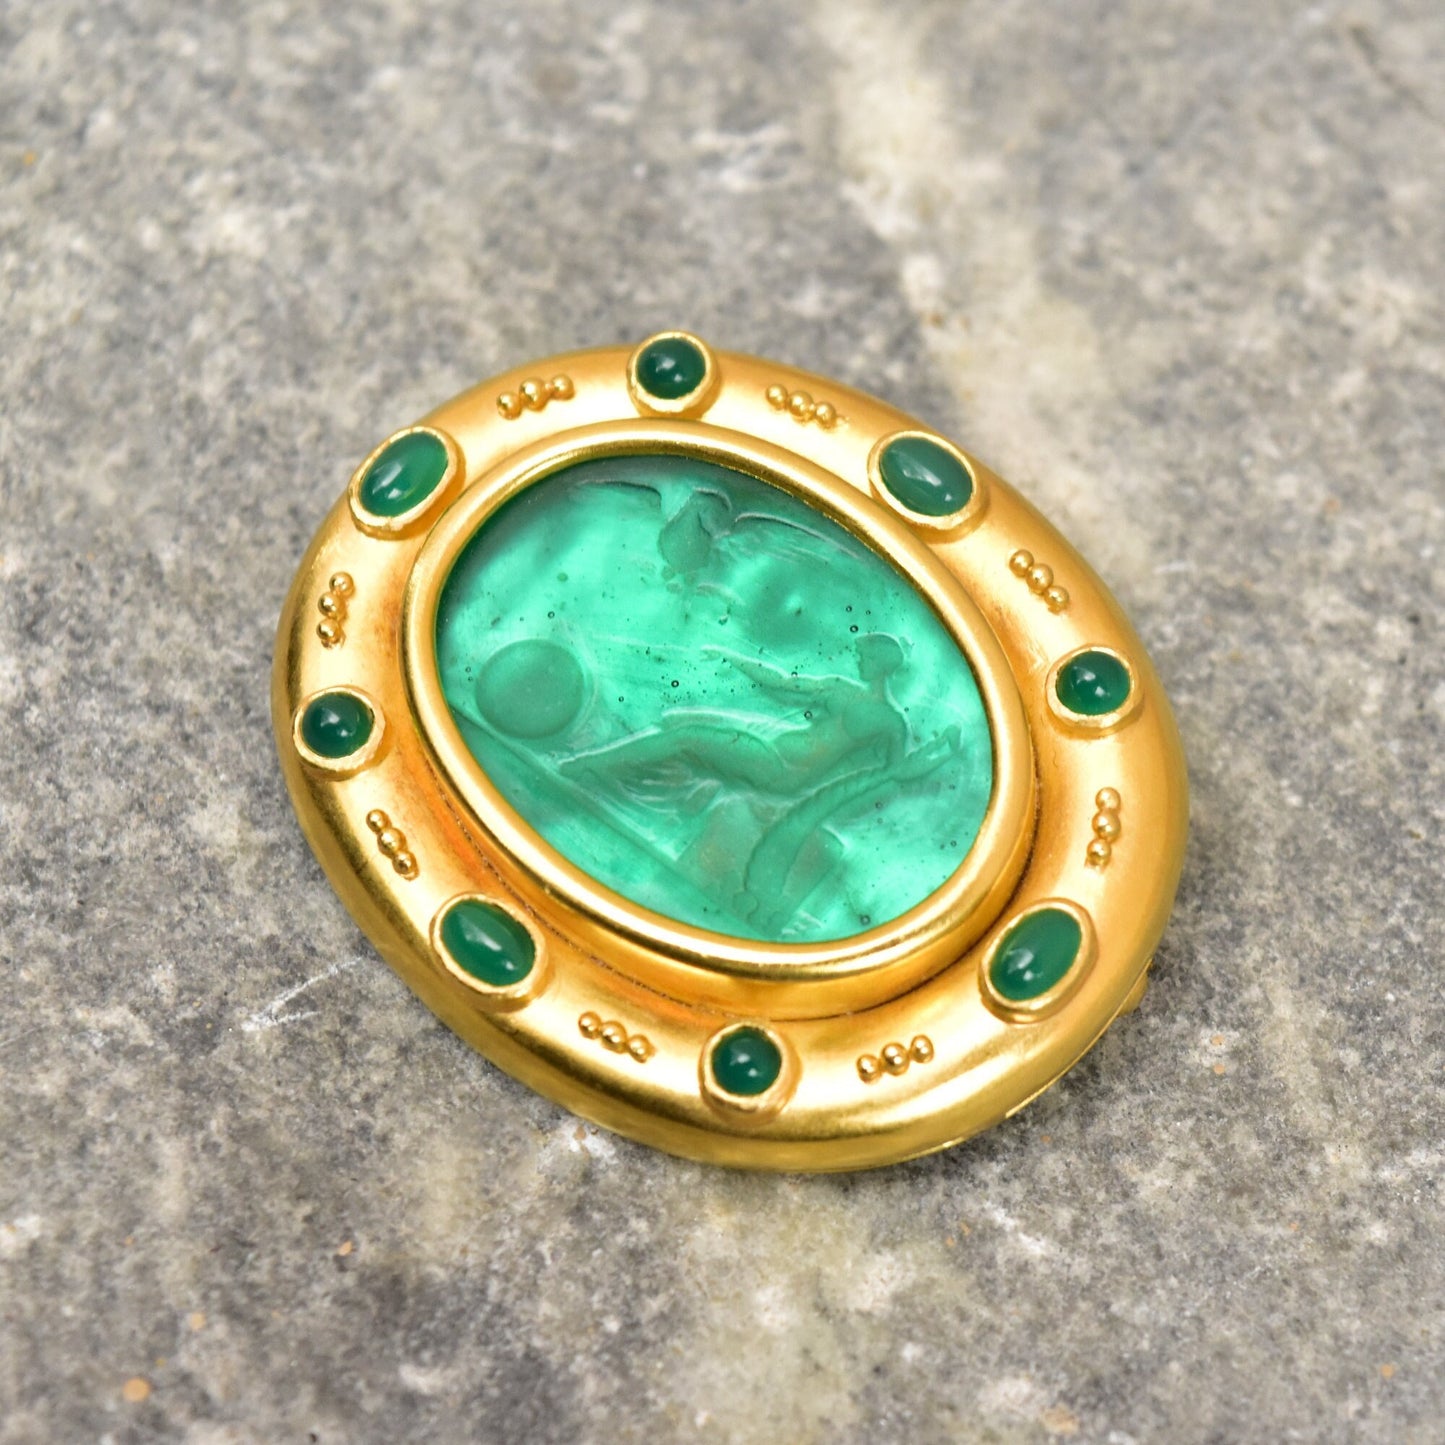 18K gold brooch pendant featuring an oval Venetian glass intaglio in emerald green, accented with small round emerald cabochons, with a mother of pearl backing, measuring approximately 2 inches wide, by Elizabeth Locke.